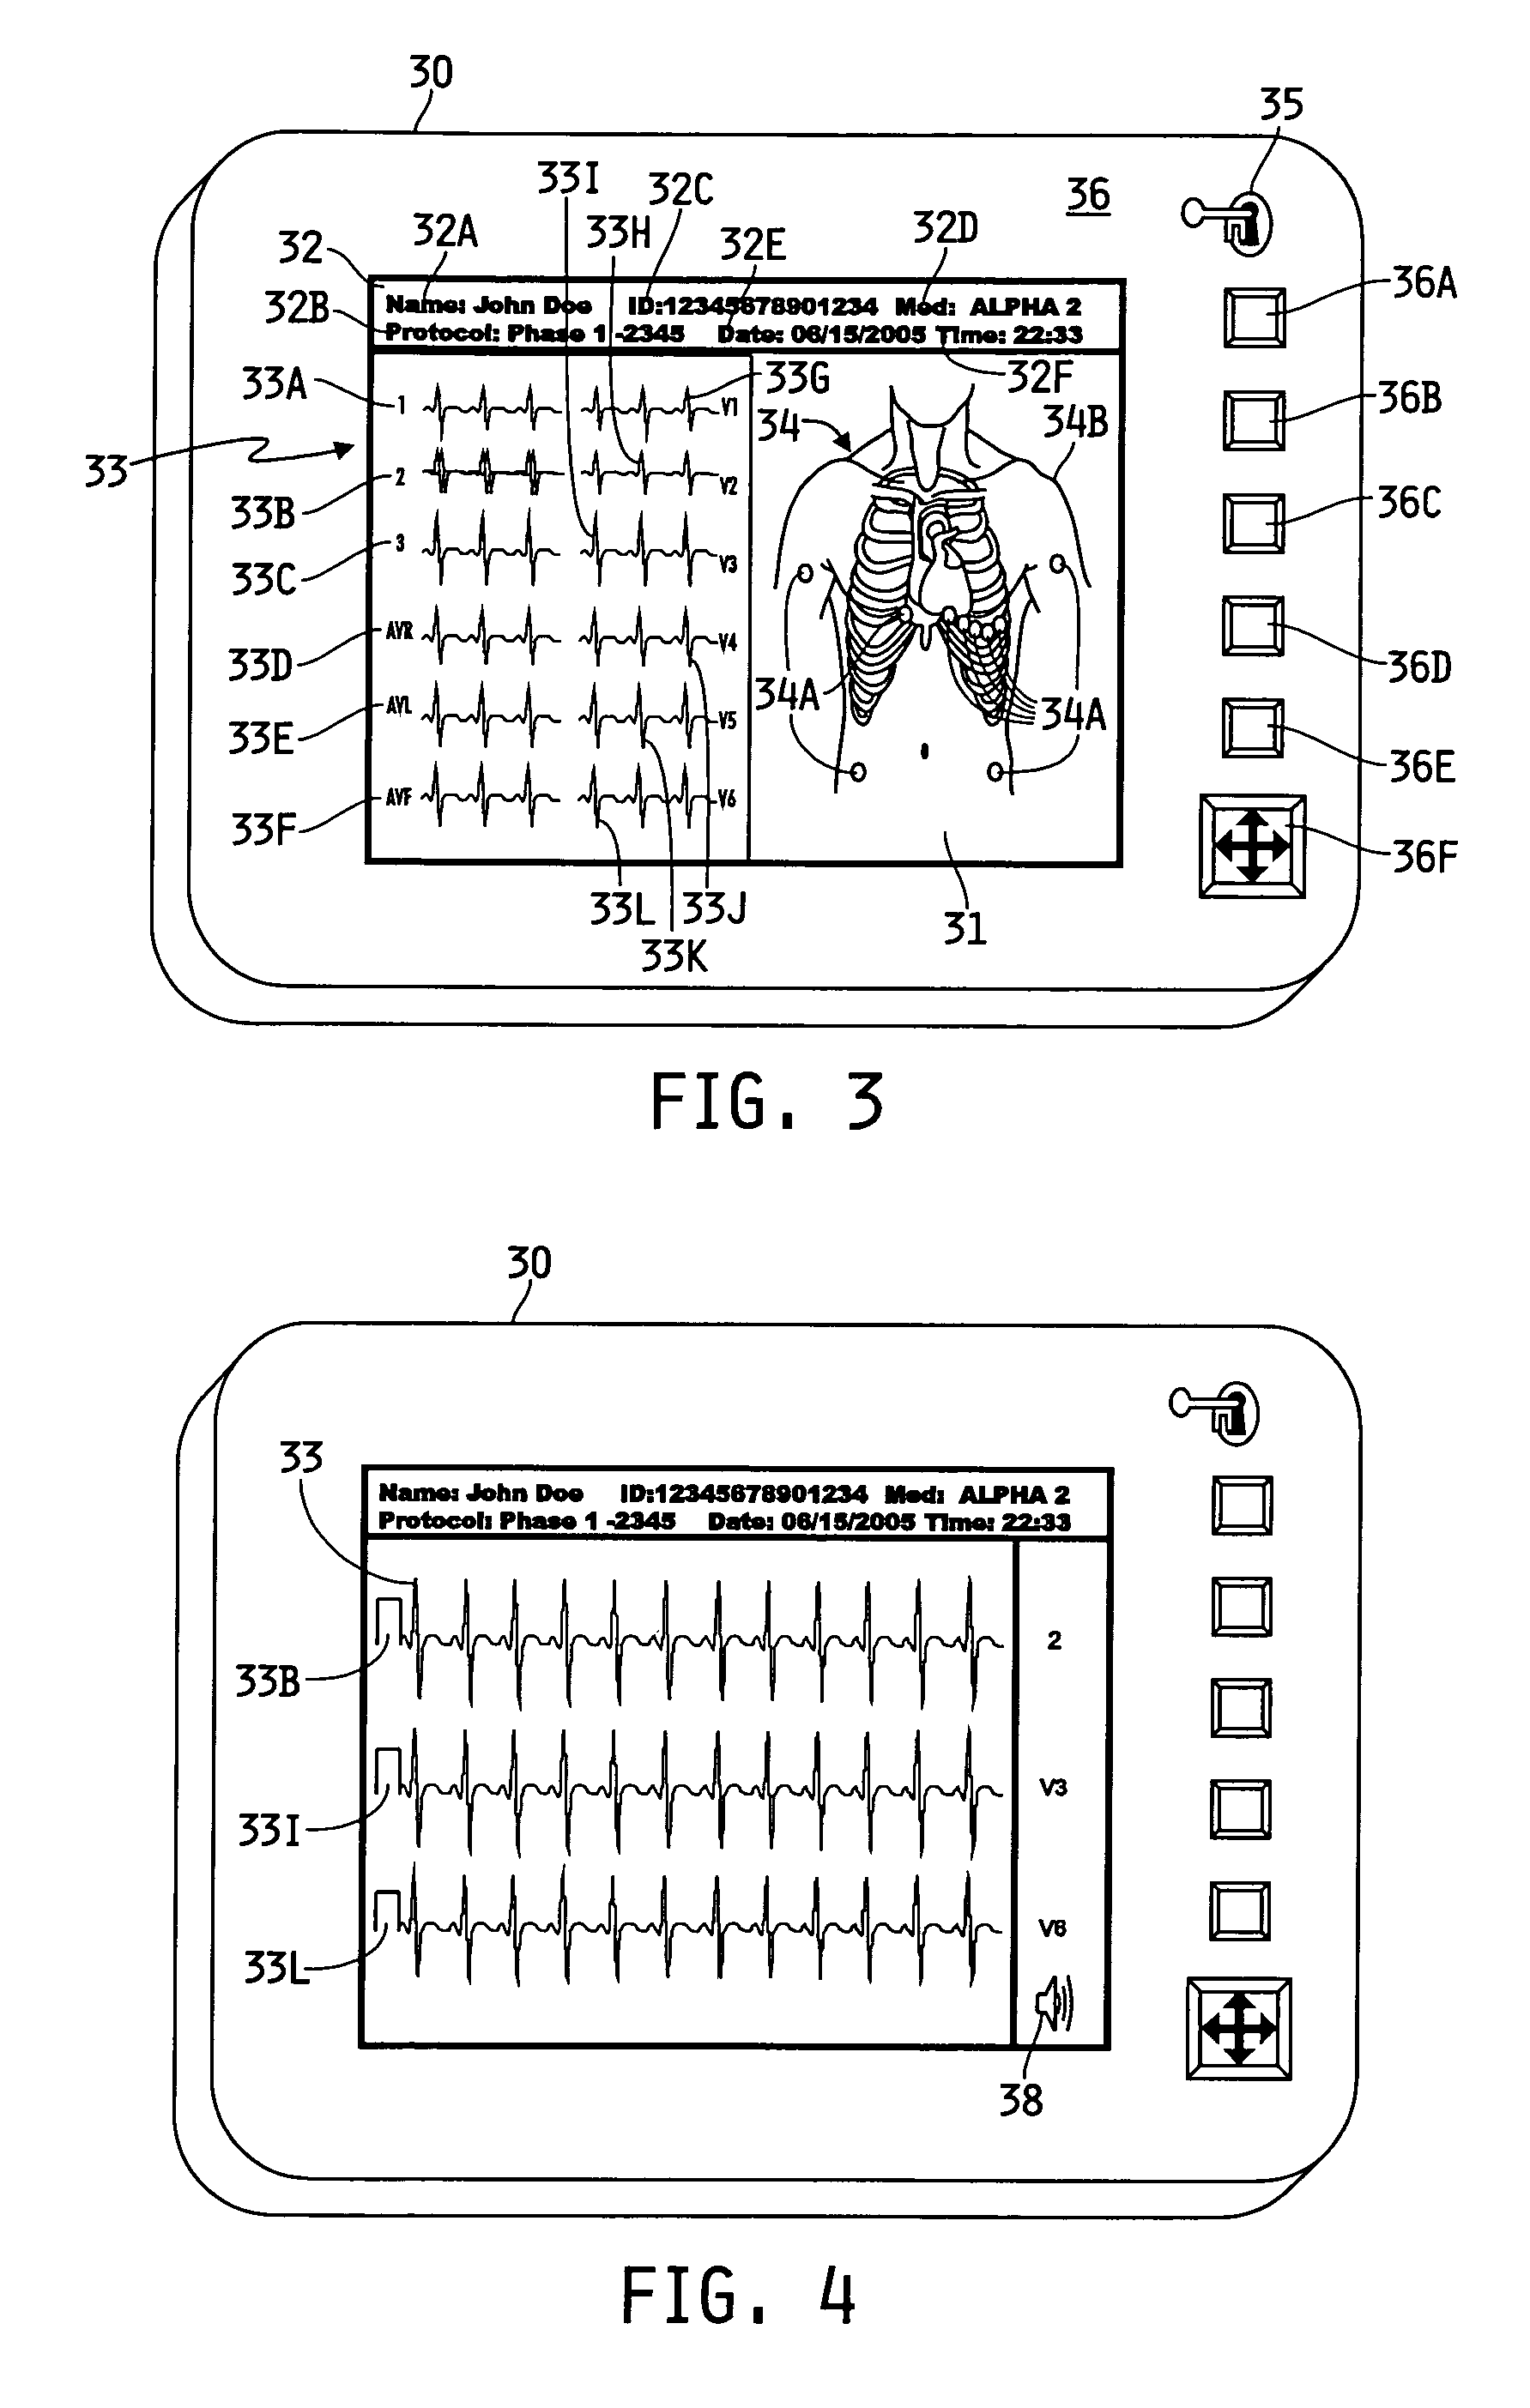 Method and system for collecting data on a plurality of patients